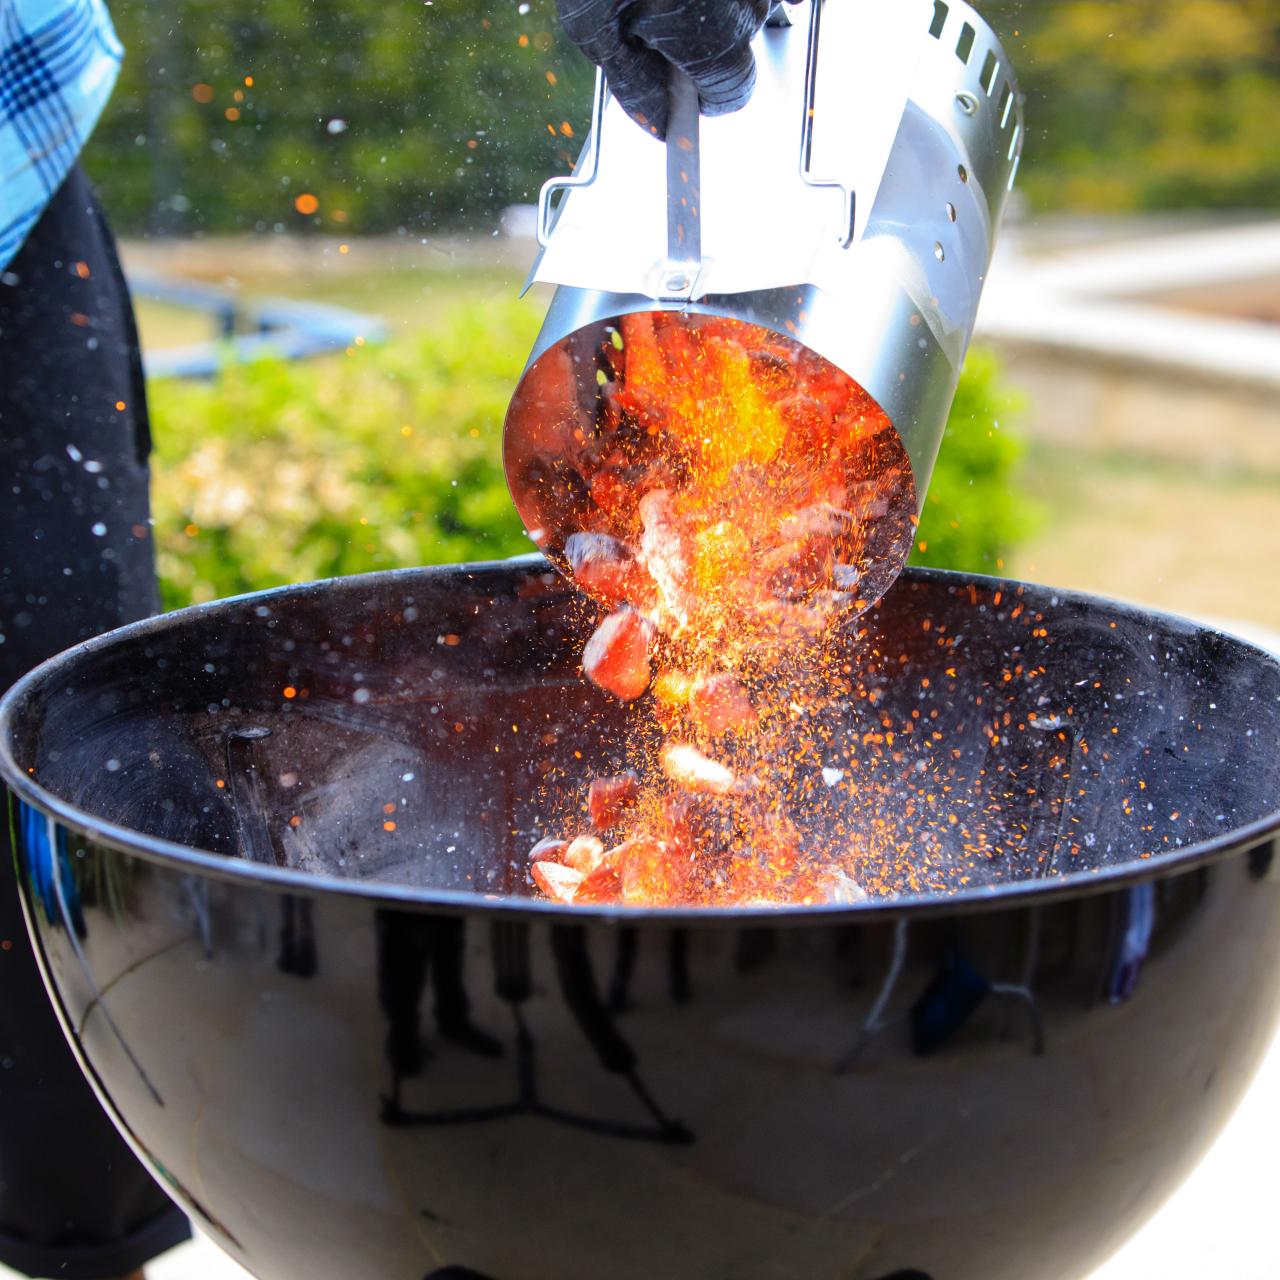 You Absolutely Have to Clean Your Charcoal Grill